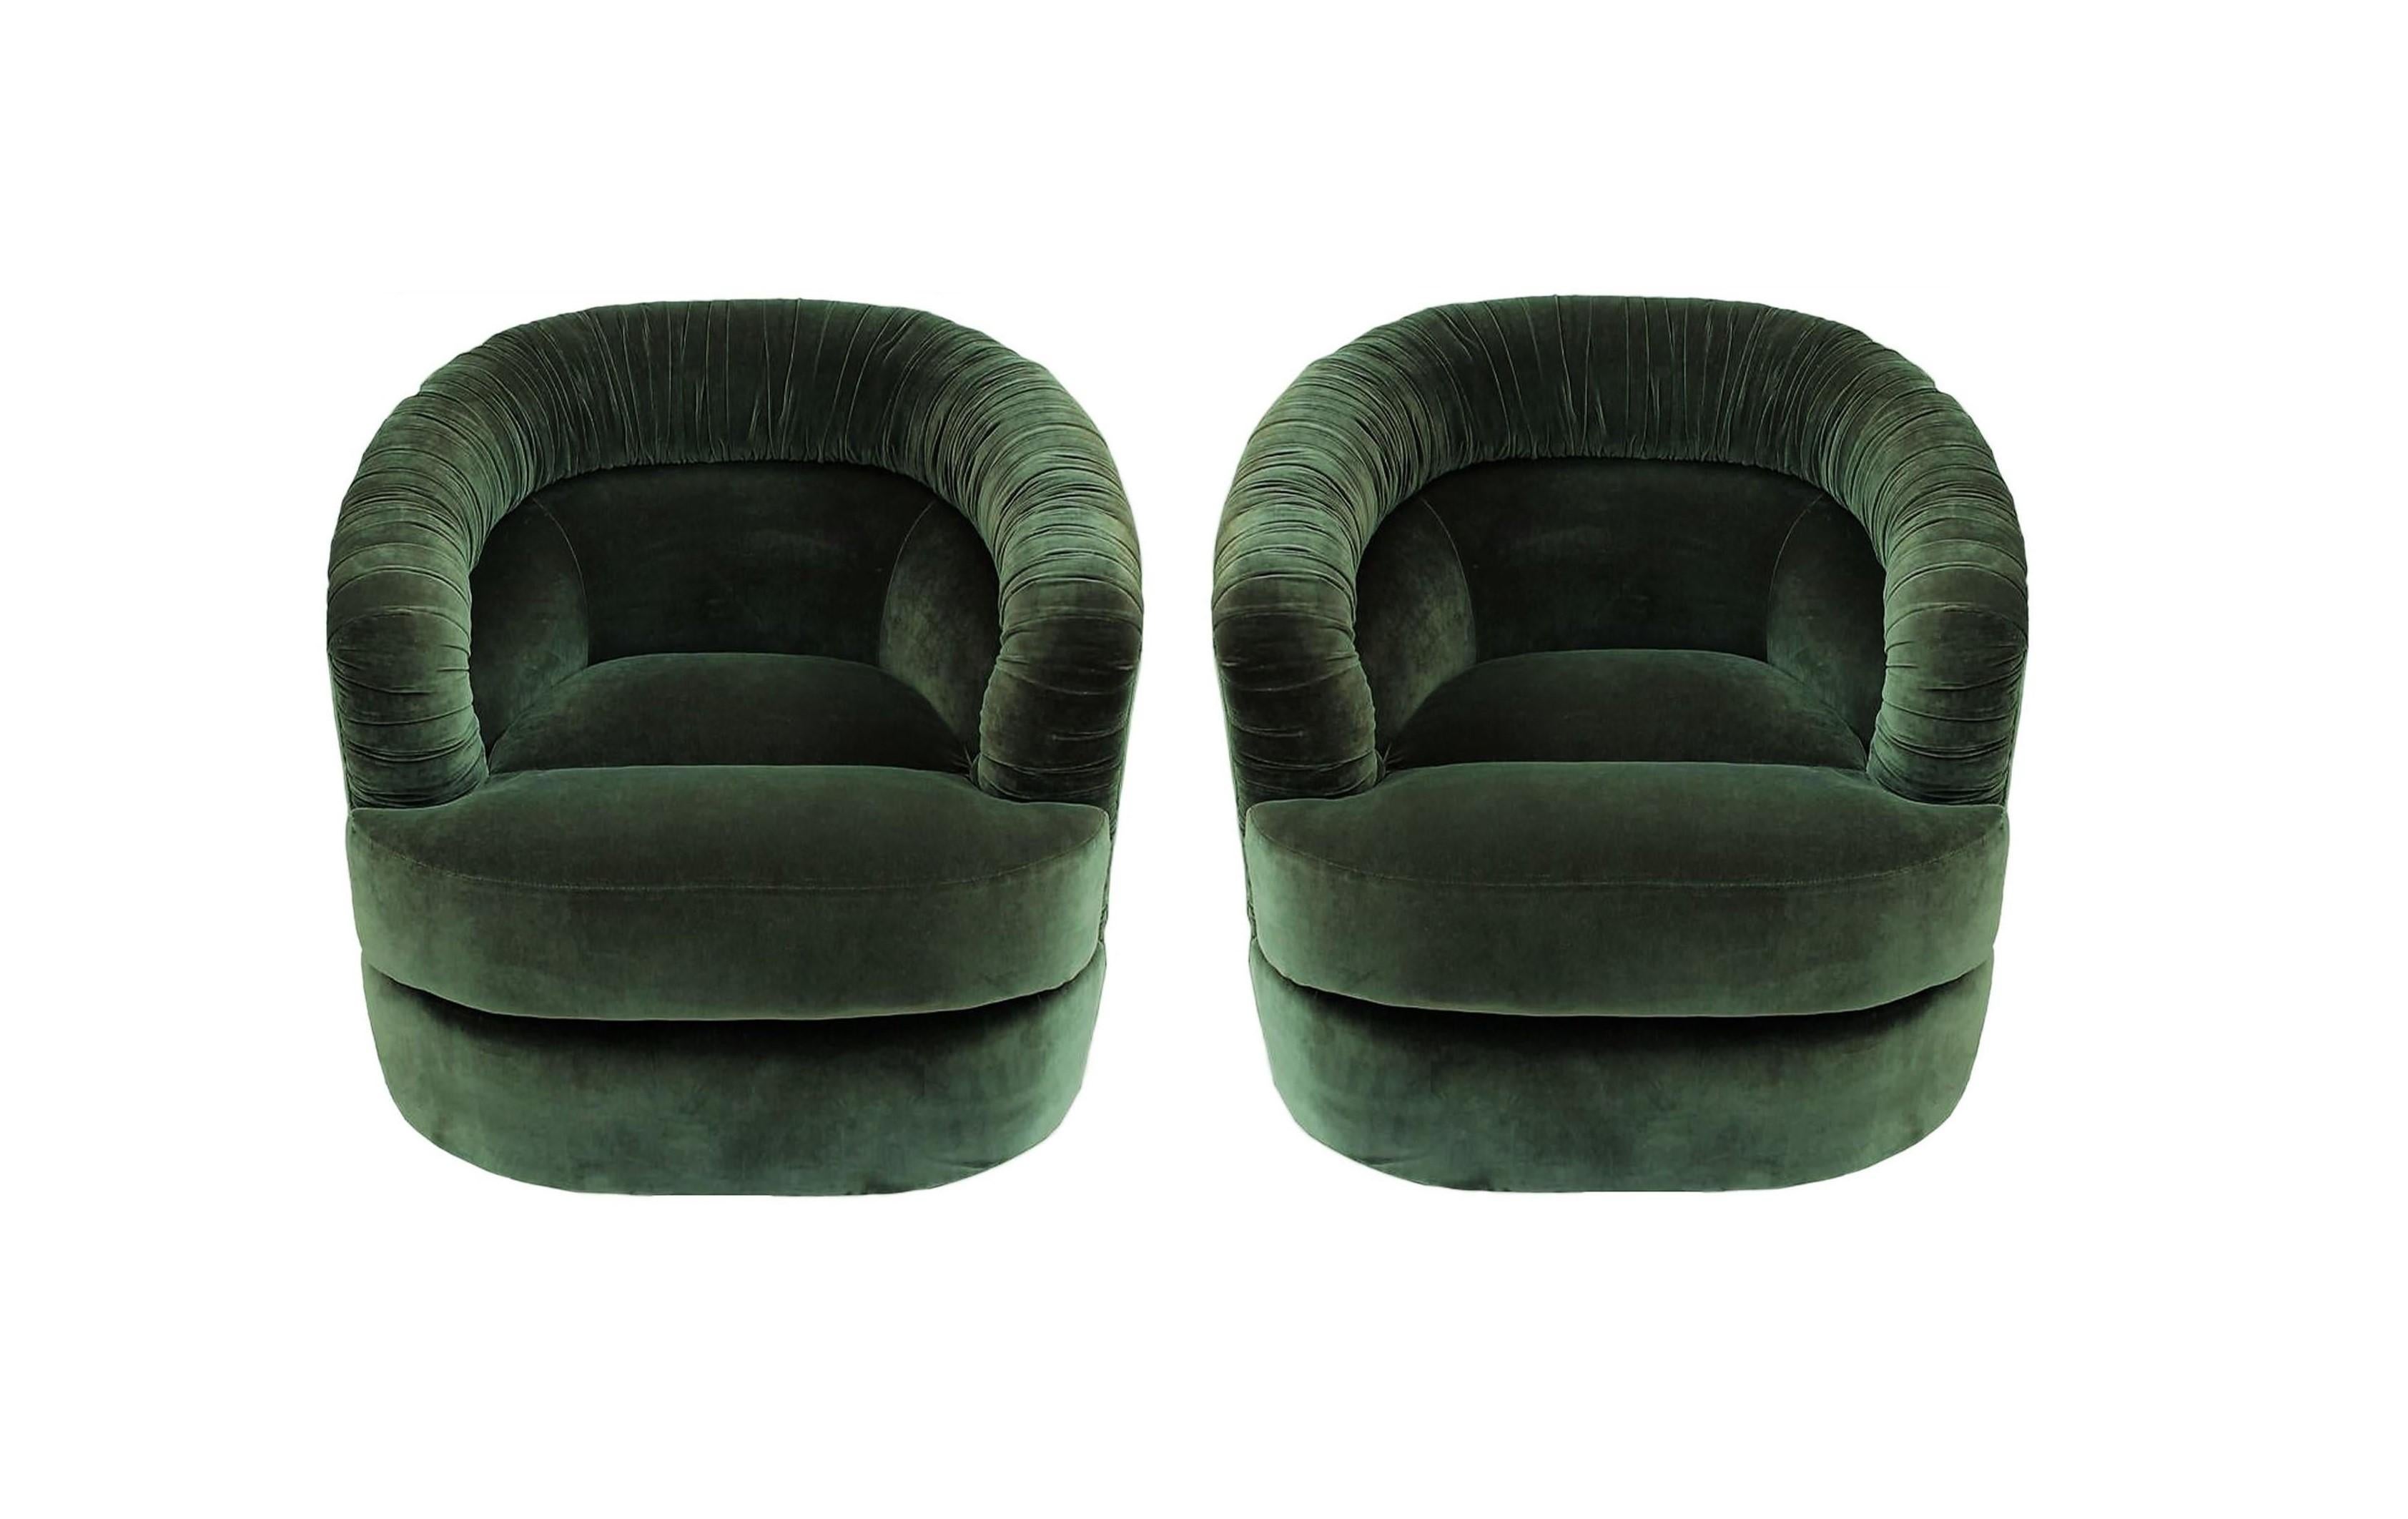 Fabulously unique pair of Mid-Century Modern Milo Baughman style swivel club chairs. These attractive chairs represent the perfect mix of design, function, and comfort. Luxuriously upholstered in soft green colored velvet, these wide and